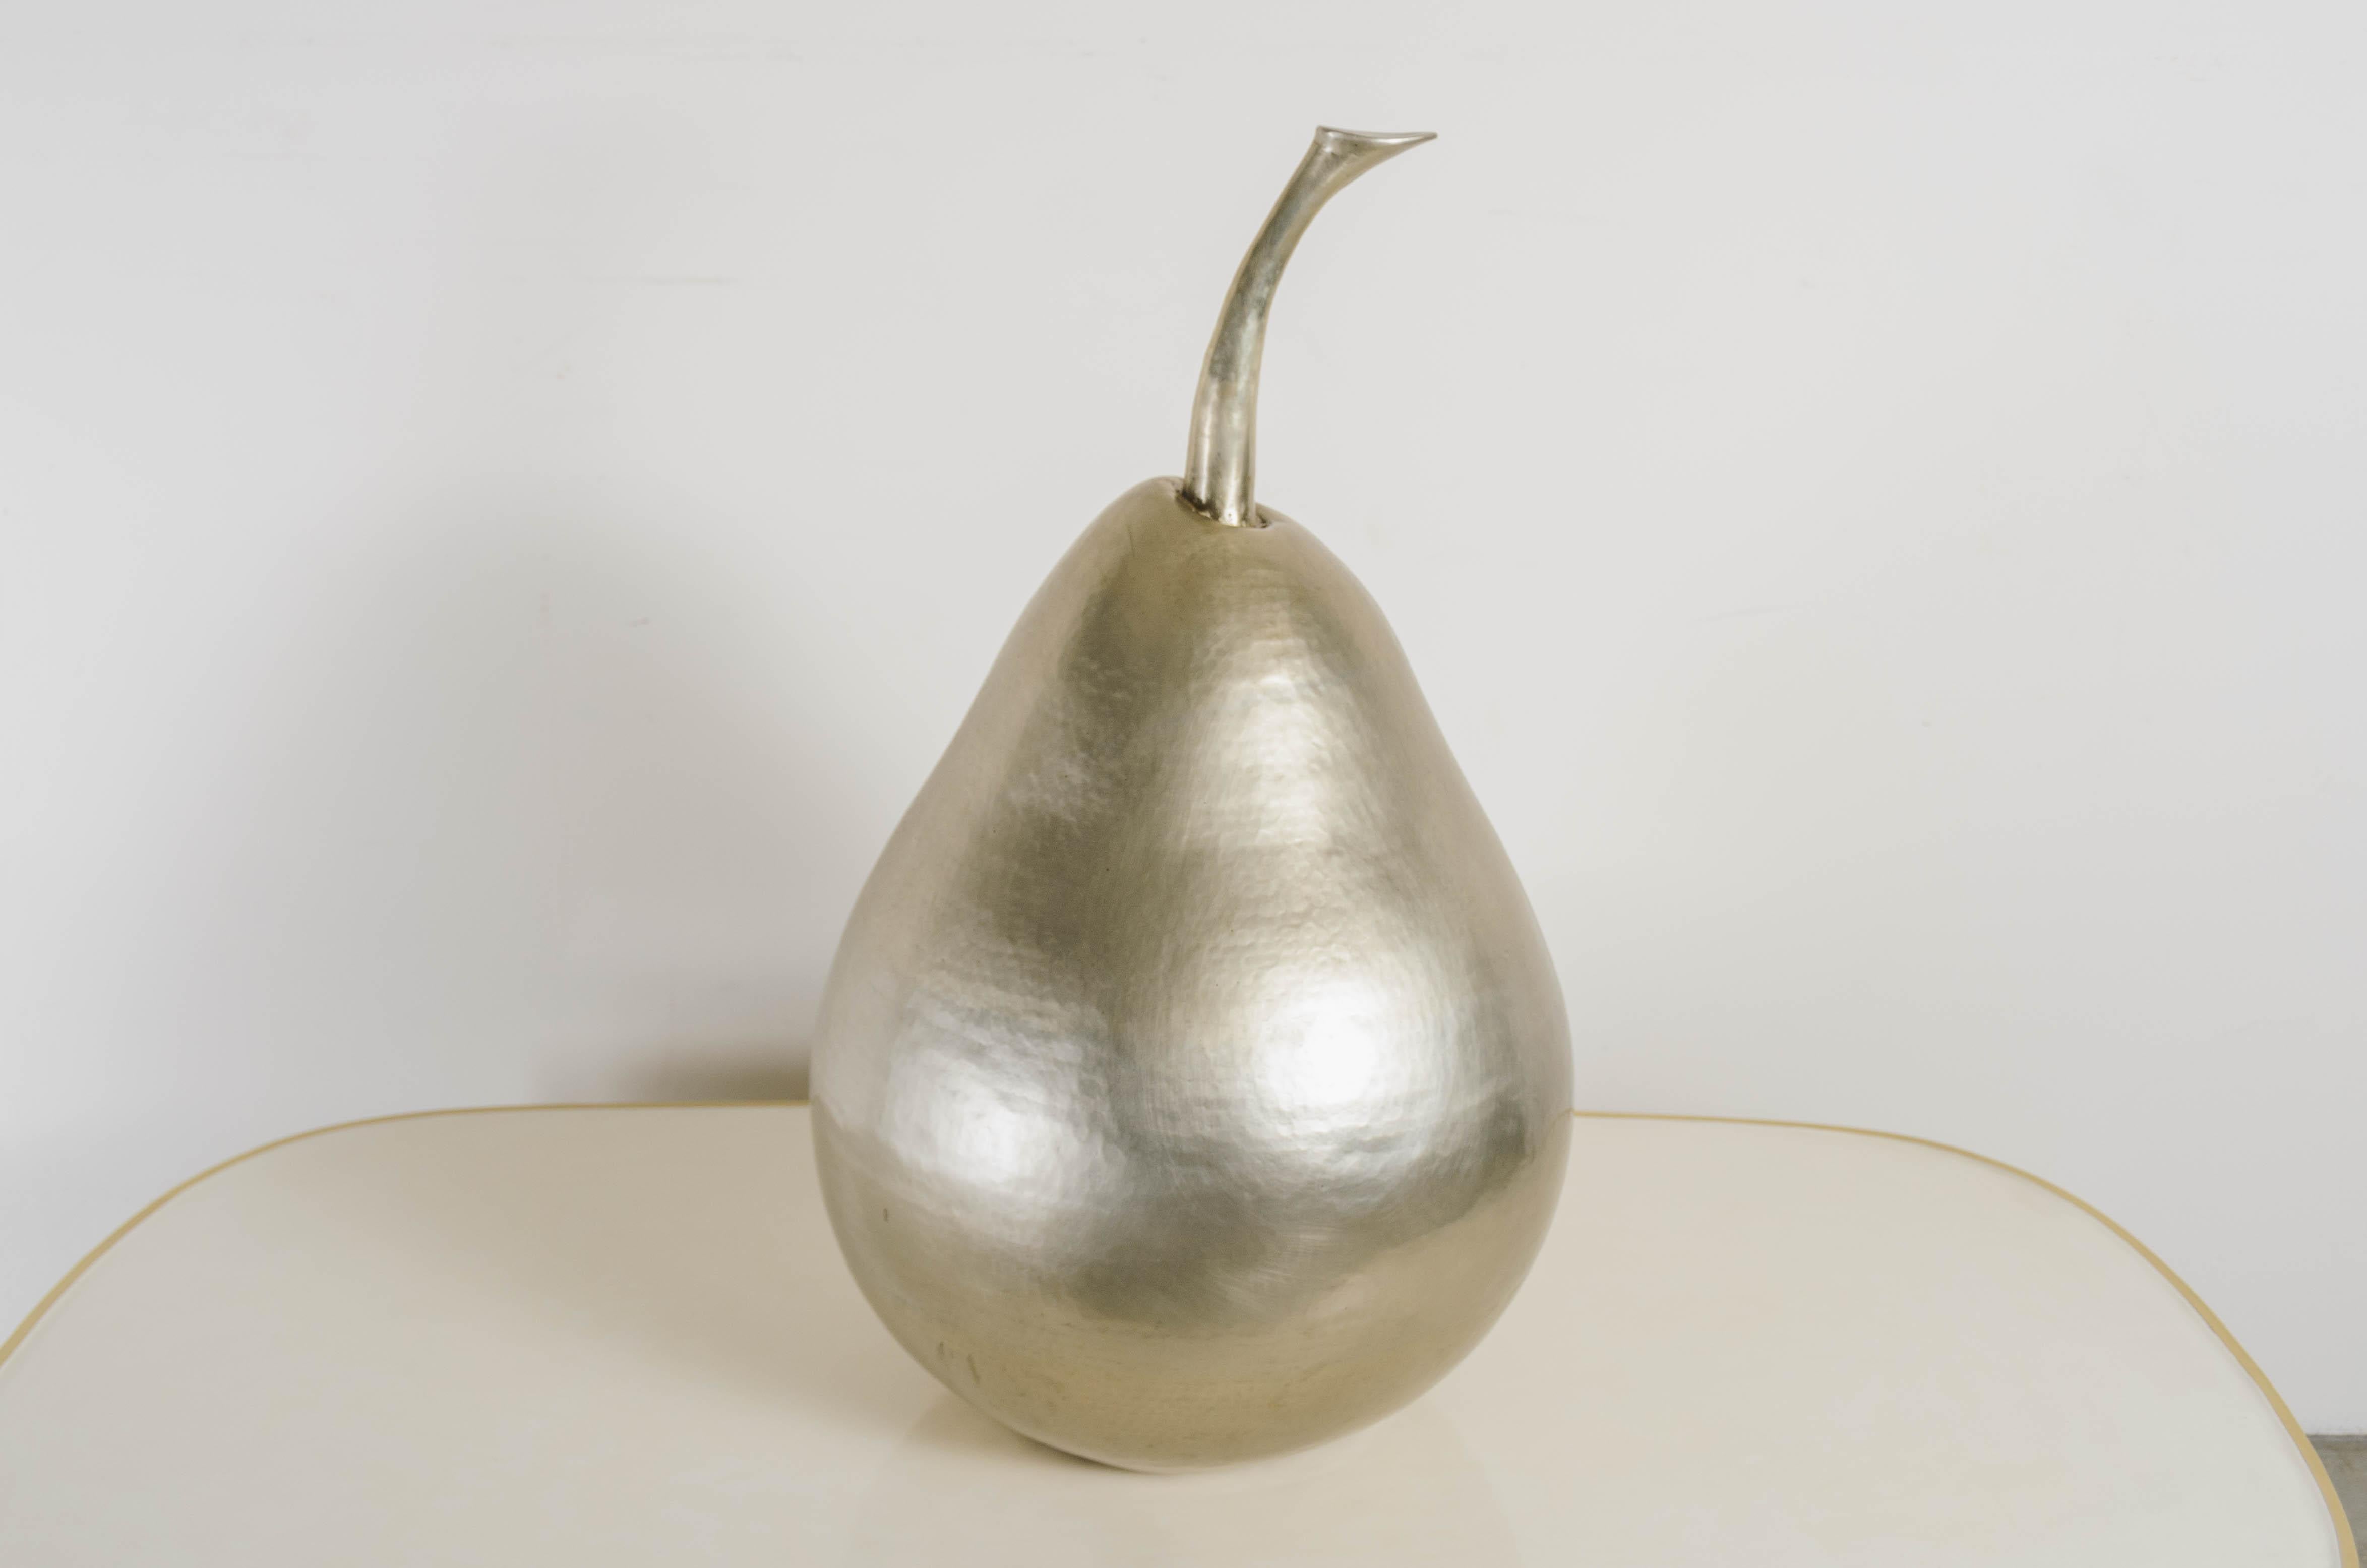 Pear sculpture
White bronze
Hand repoussé
Limited edition
Each piece is individually crafted and is unique. 
Repoussé is the traditional art of hand-hammering decorative relief onto sheet metal. The technique originated around 800 BC between